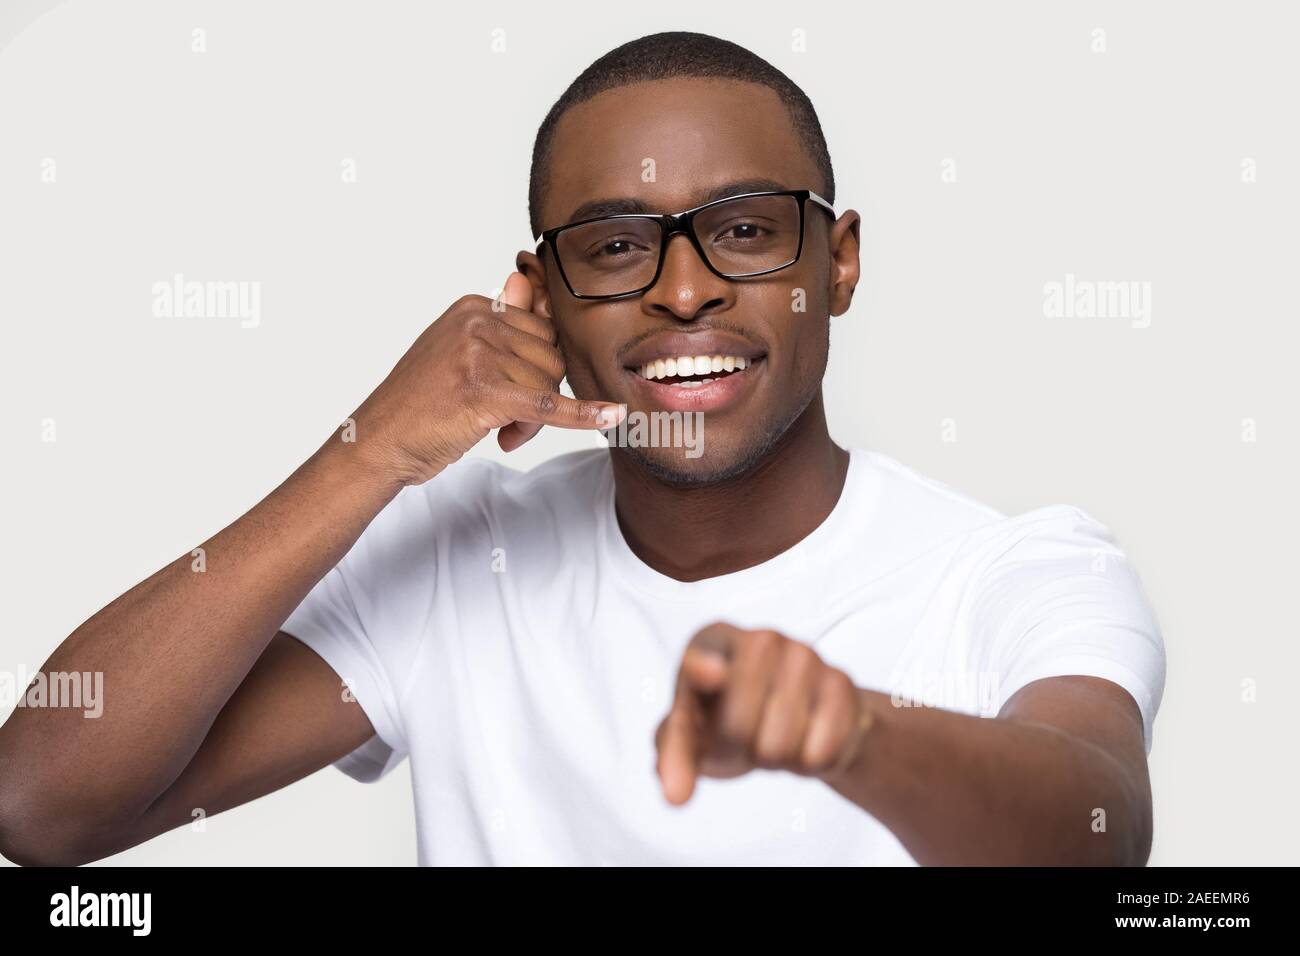 Smiling African American man in glasses showing call me gesture Stock Photo